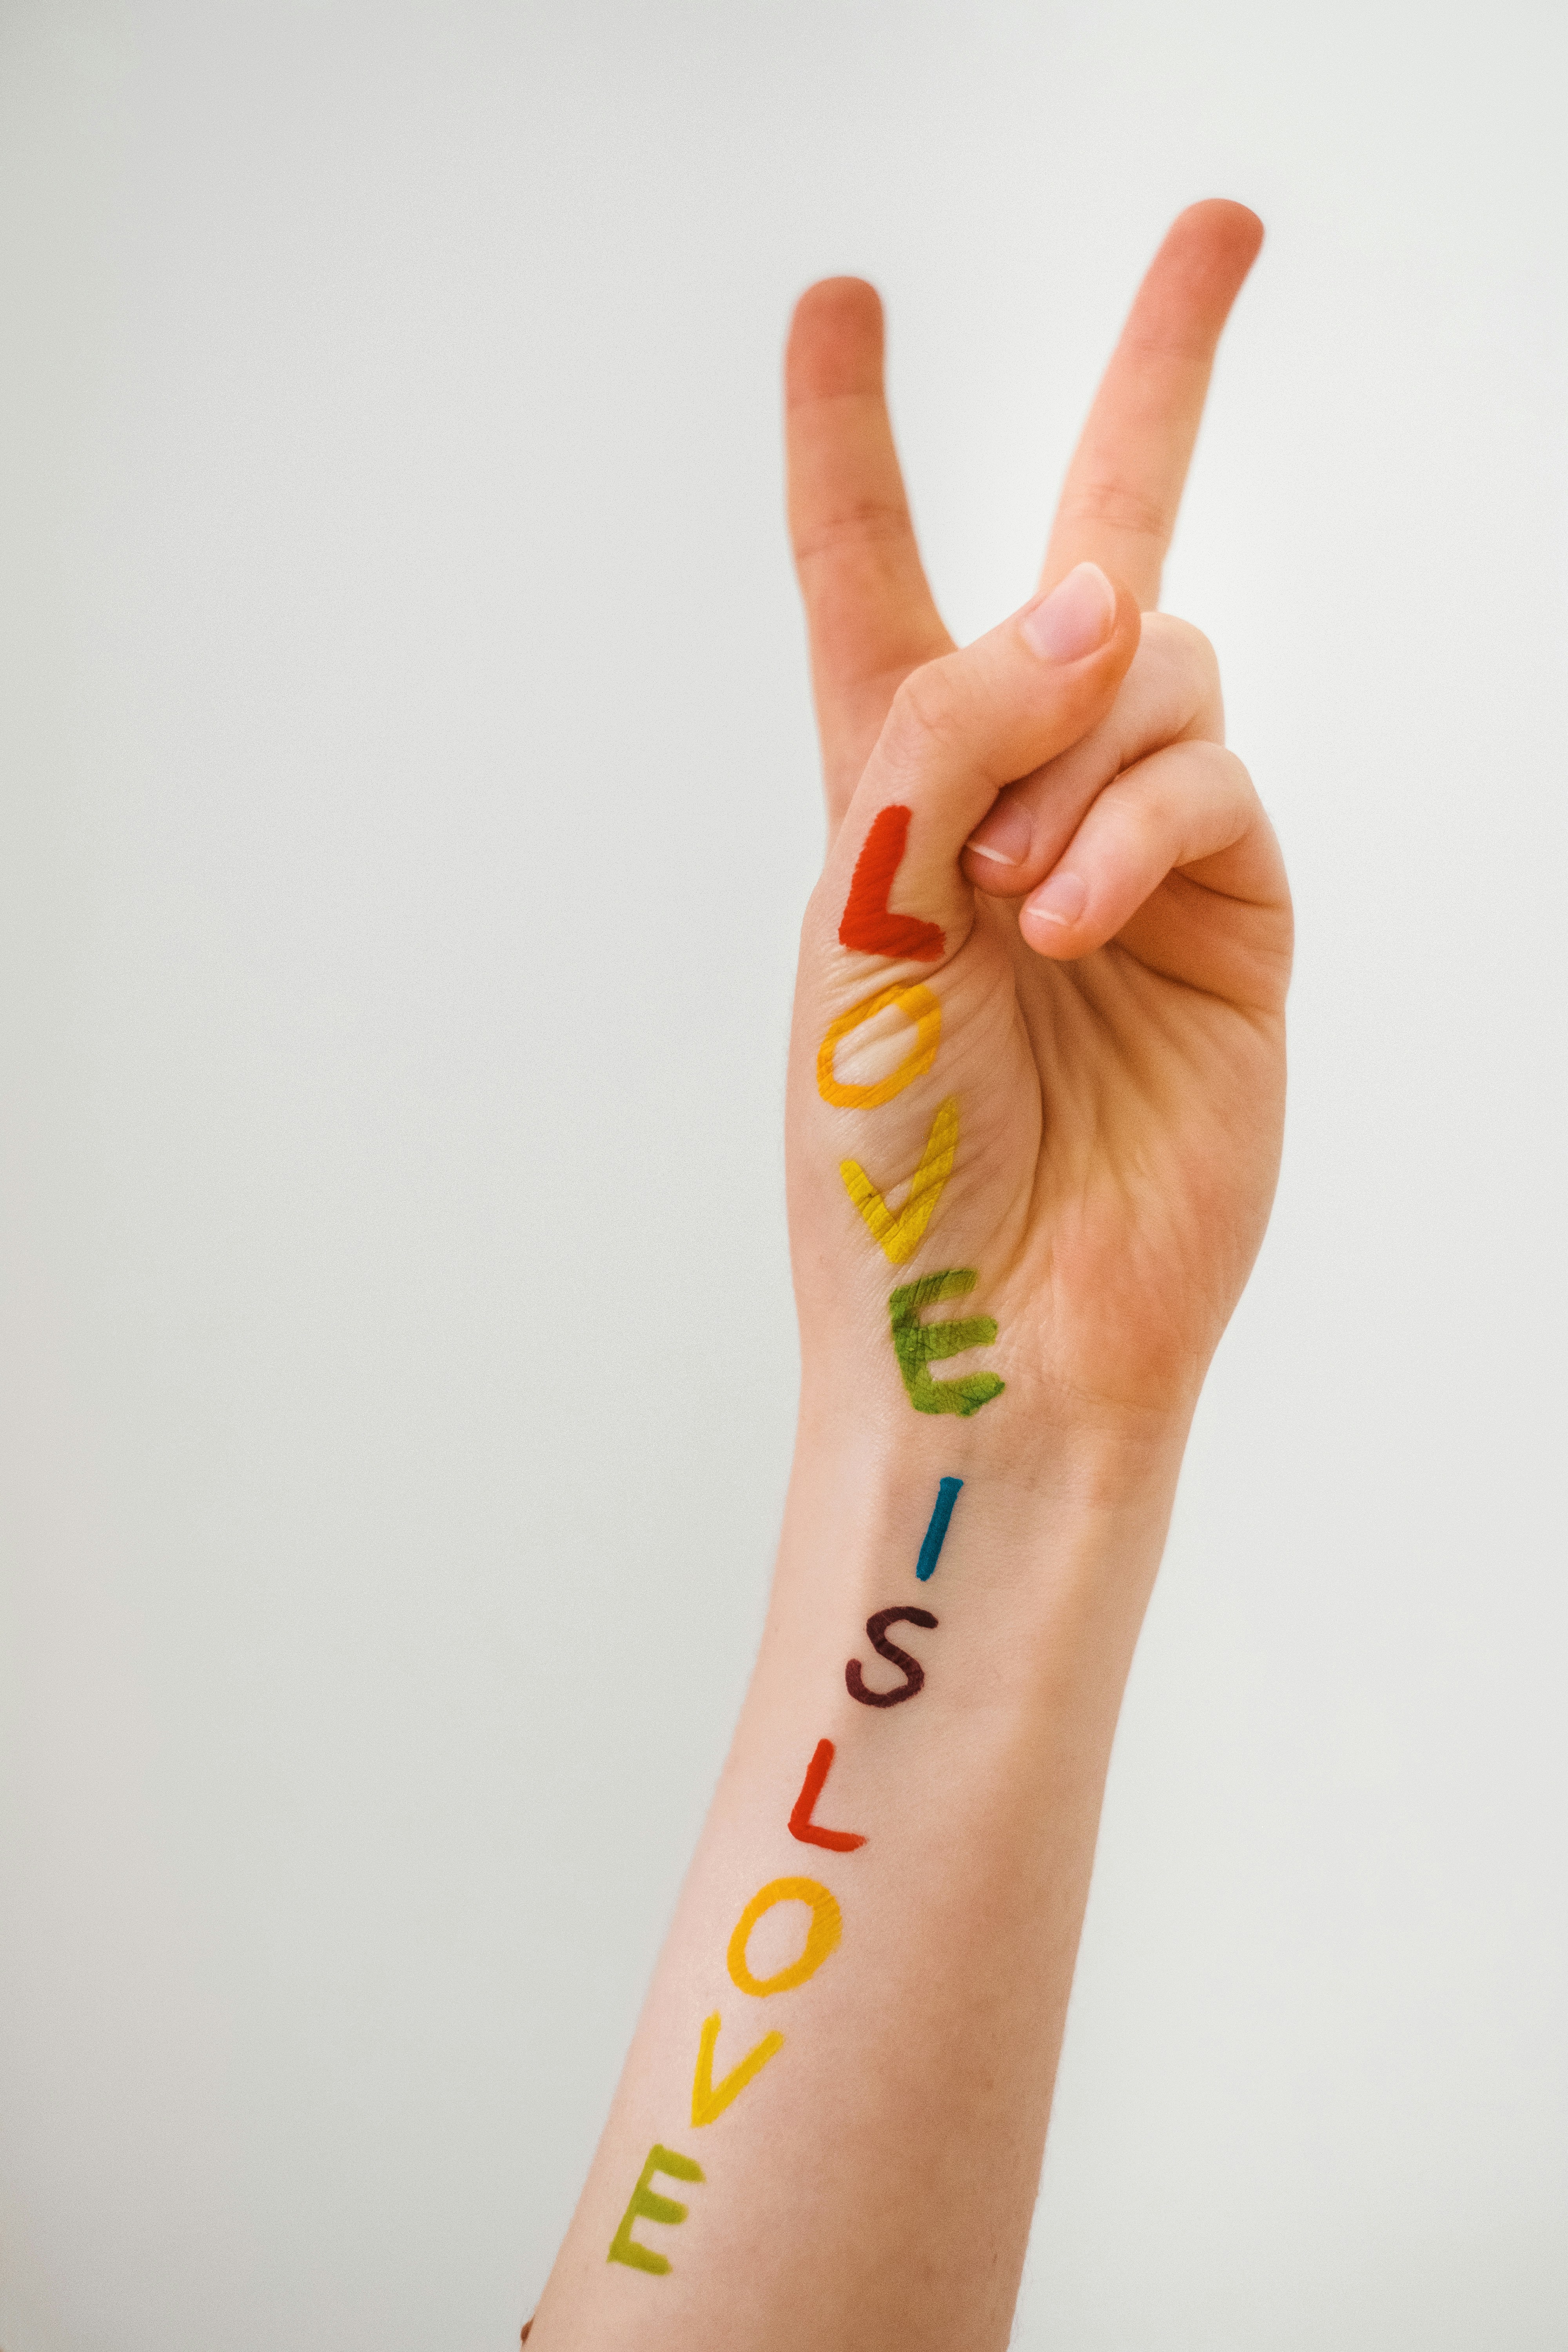 A white arm is raised displaying a peace sign with two fingers in the air, and the phrase "LOVE IS LOVE" is painted in rainbow colours along the forearm. Each letter is in a different colour, corresponding to the stripes of the LGBTQ+ pride flag starting with red at the top and ending with purple at the wrist.